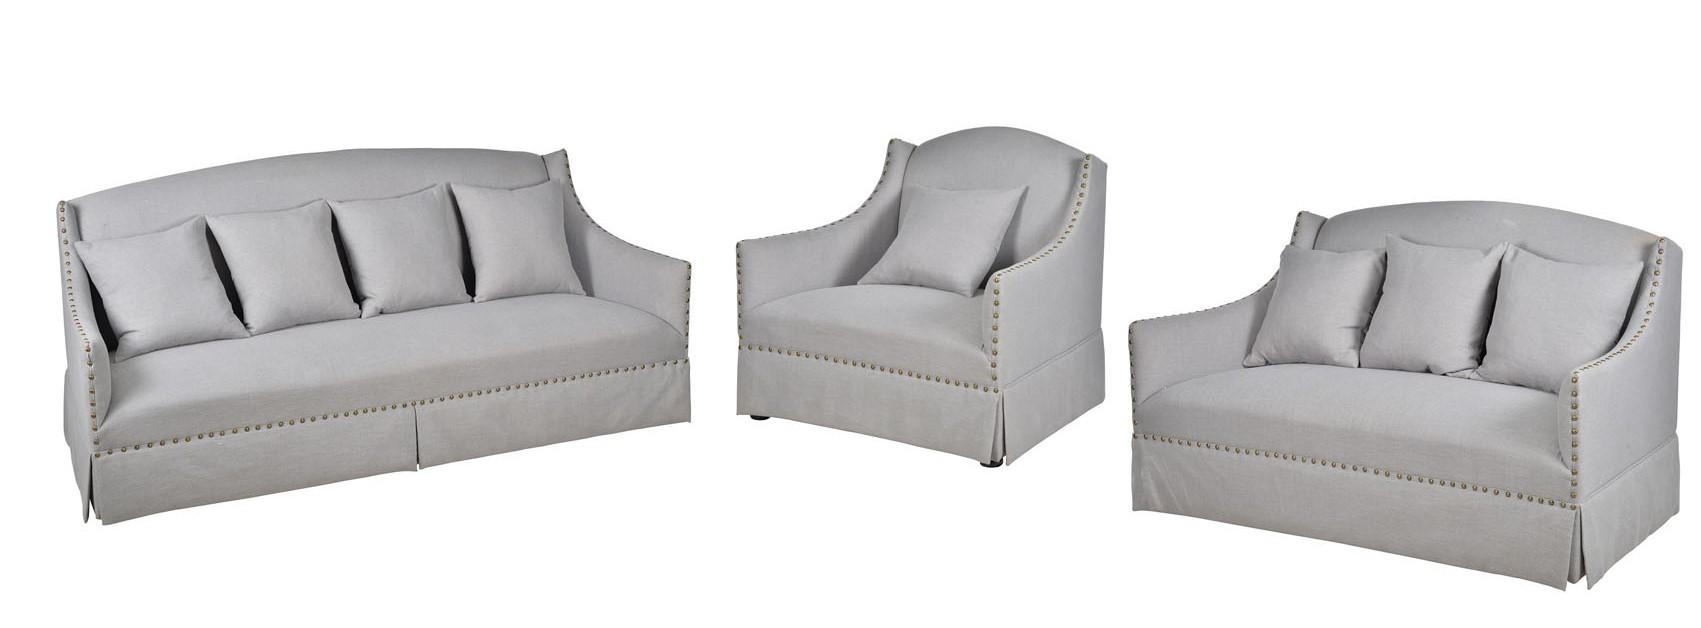 Contemporary, Modern Sofa Loveseat and Chair Set Pampa Pampa-Set-3 in Light Gray Polyester